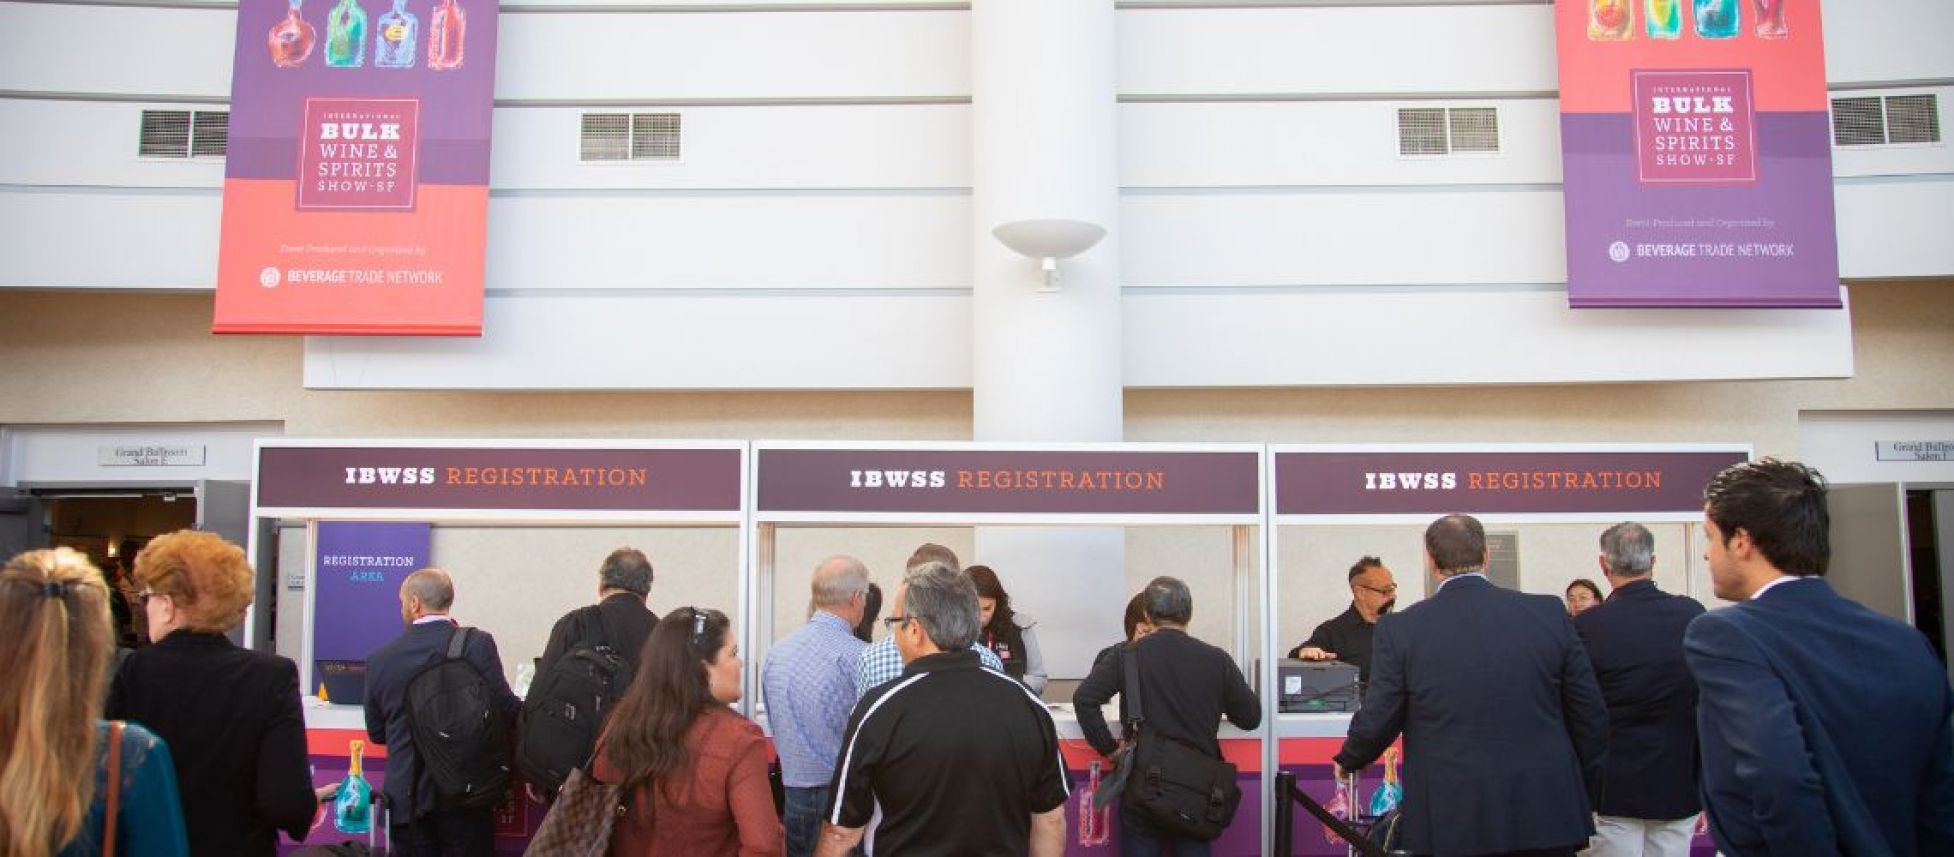 Photo for: IBWSS San Francisco Early Bird Exhibitor Pricing Offer Ends Today: JANUARY 31